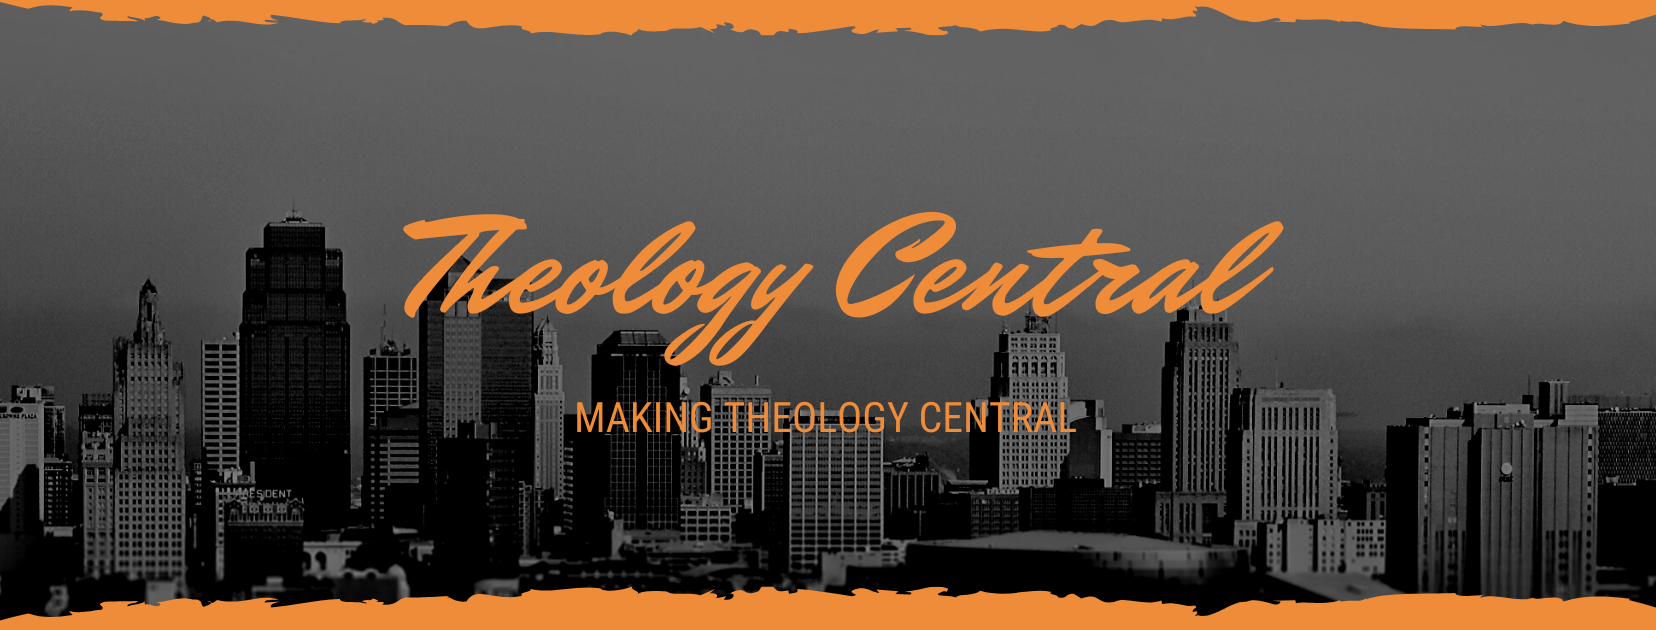 Theology Central